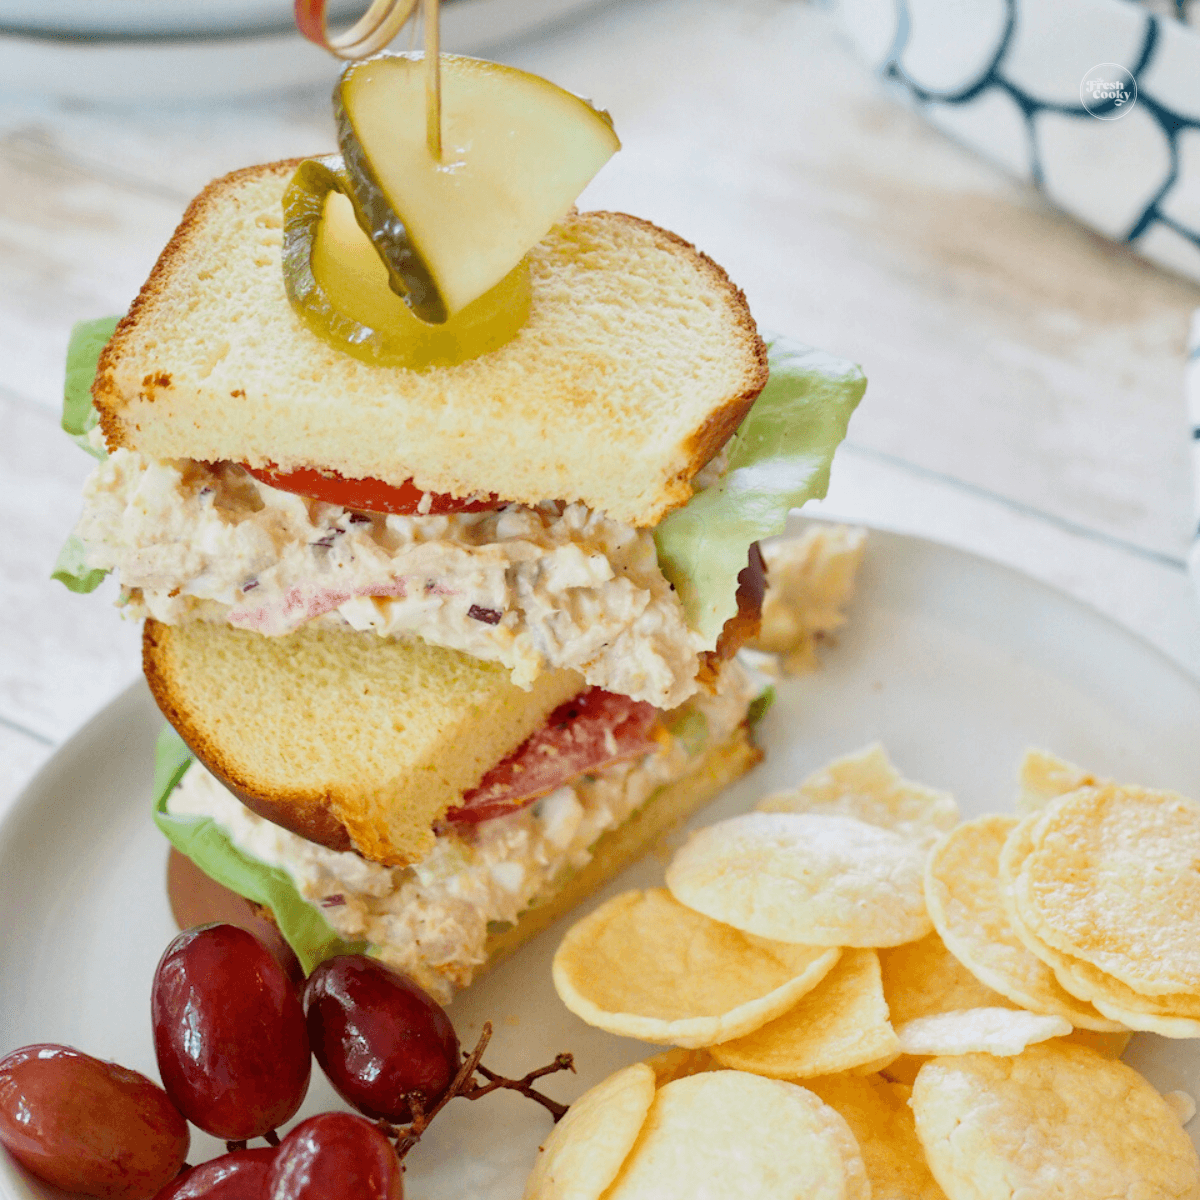 Southern Tuna Salad recipe on sandwich brioche bread, with chips and grapes.